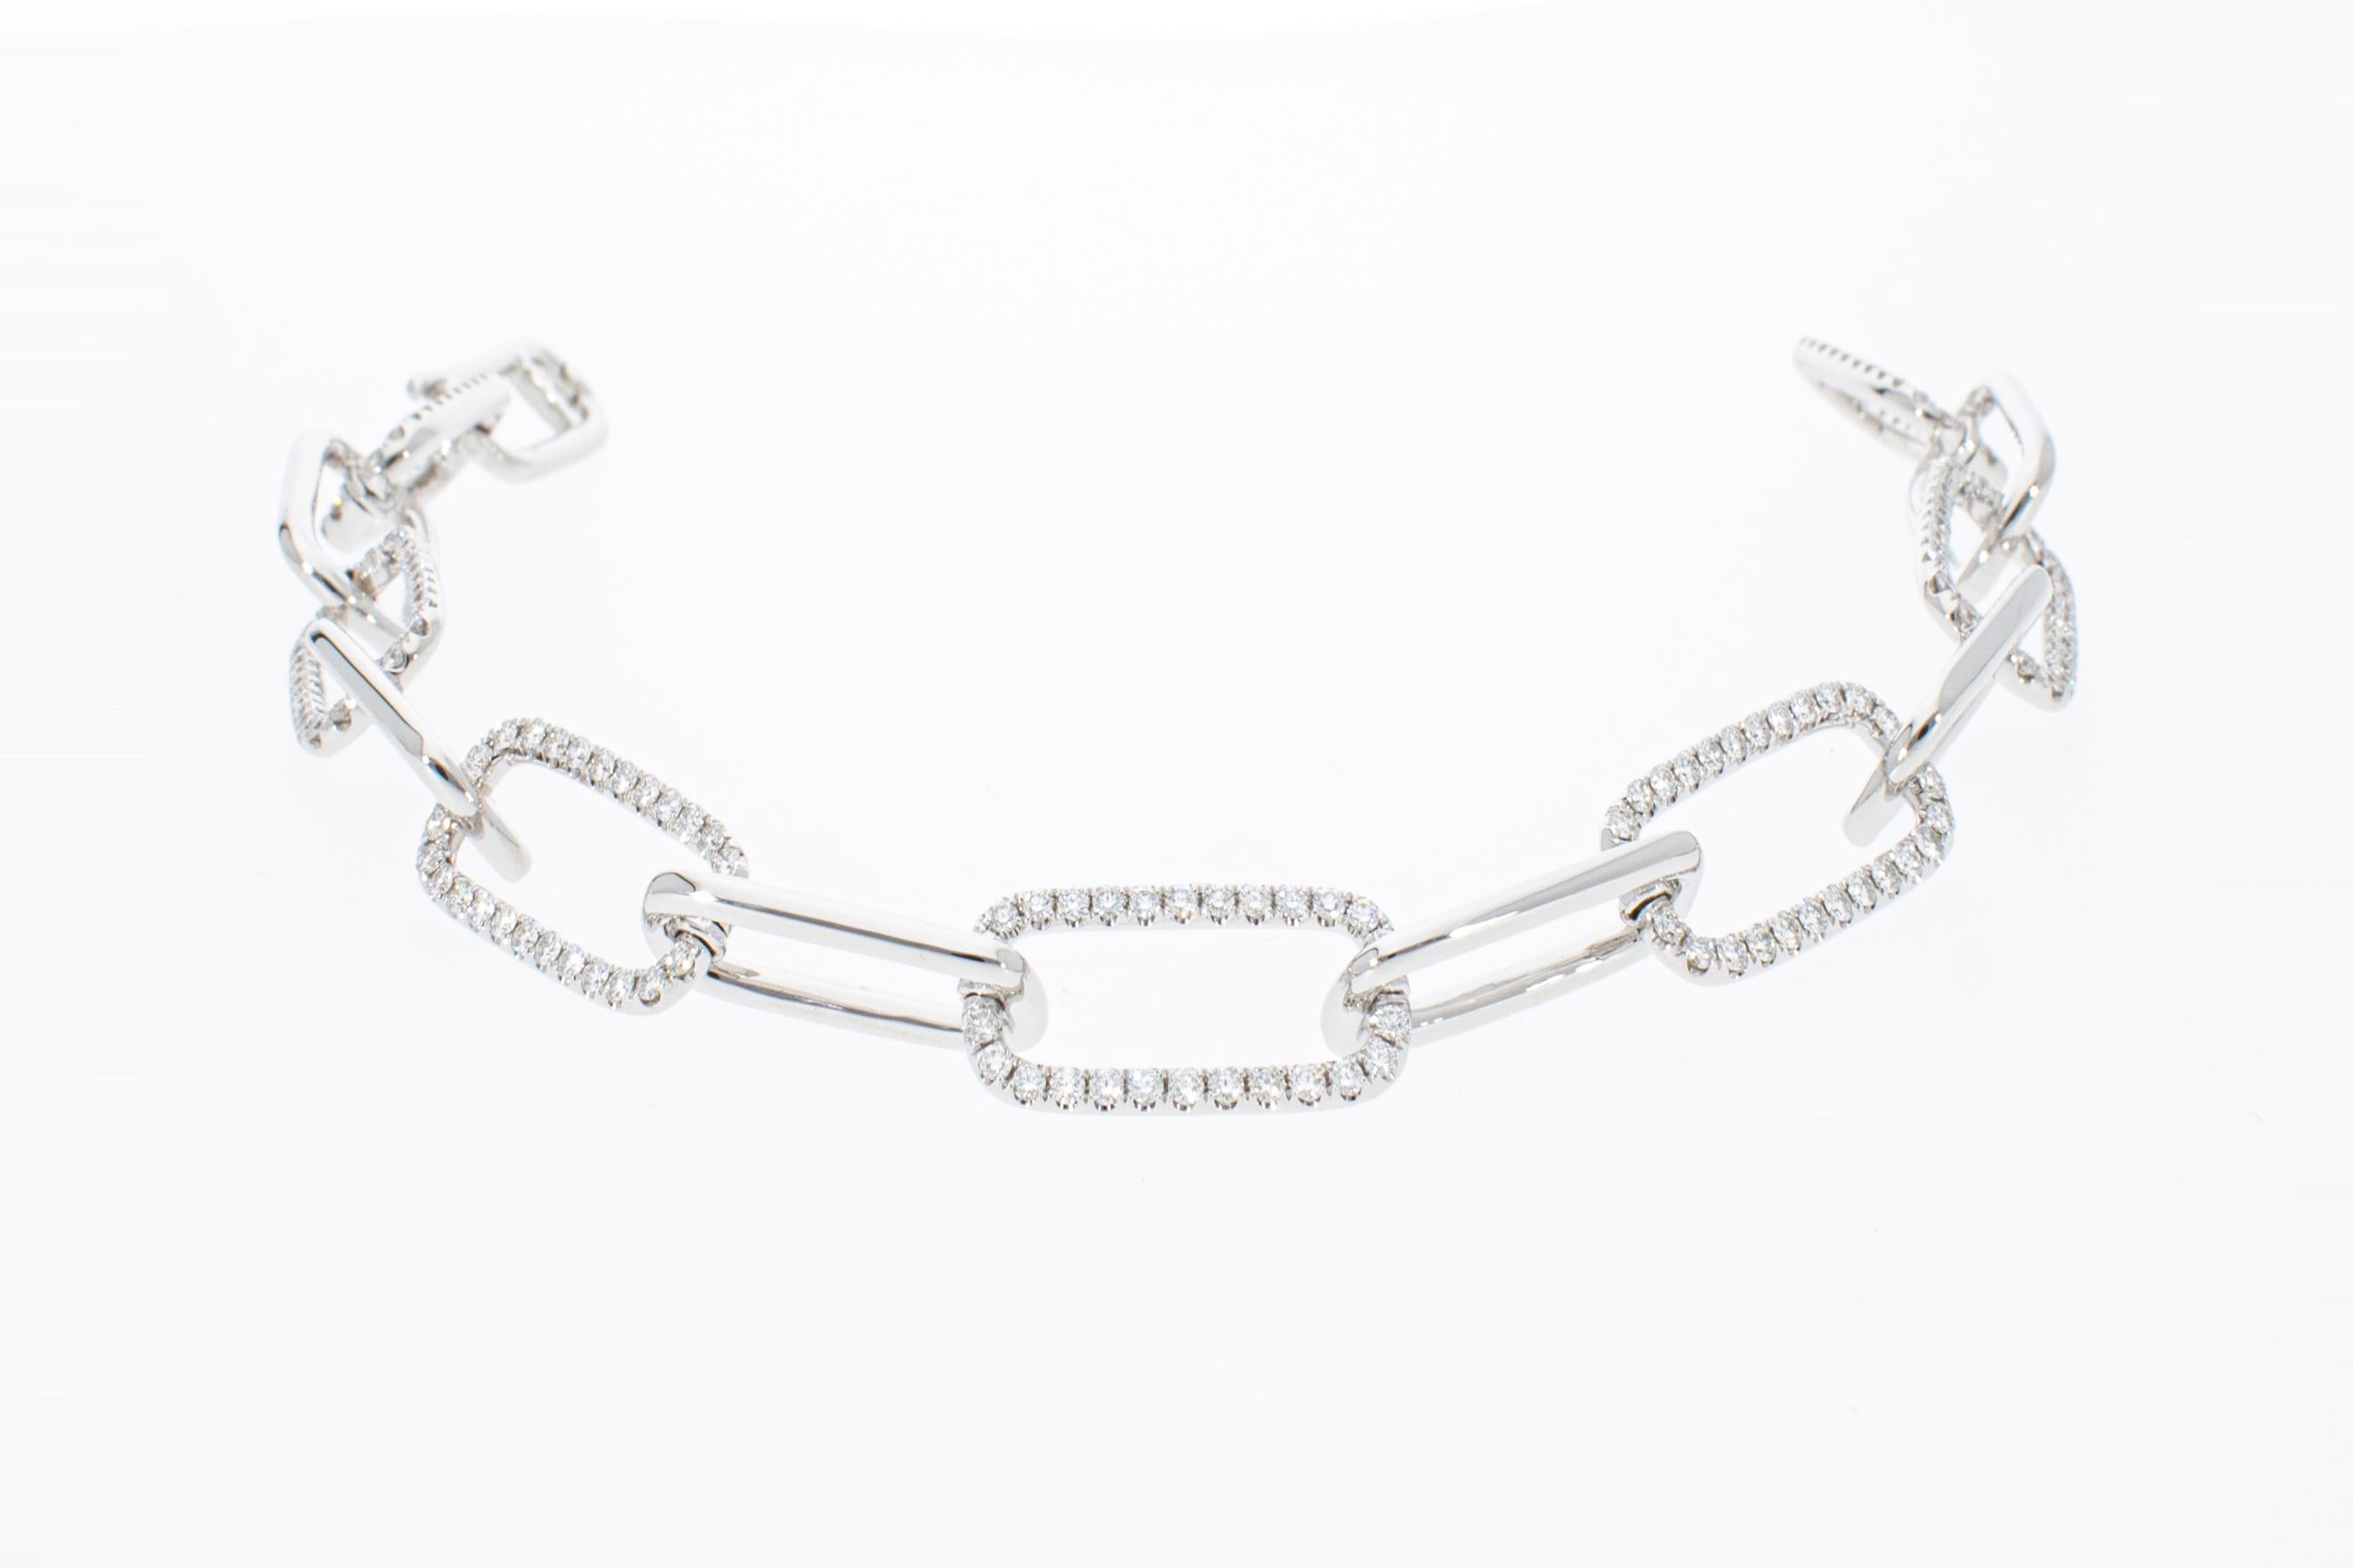 The bracelet is made up of fourteen rectangular links, of which seven links with 182 diamonds, for a total weight of ct 1.93. 
The links are hinged together and the closure is invisible.
The bracelet is 21.5 cm long.

Total Carat: ct 1.93
Total